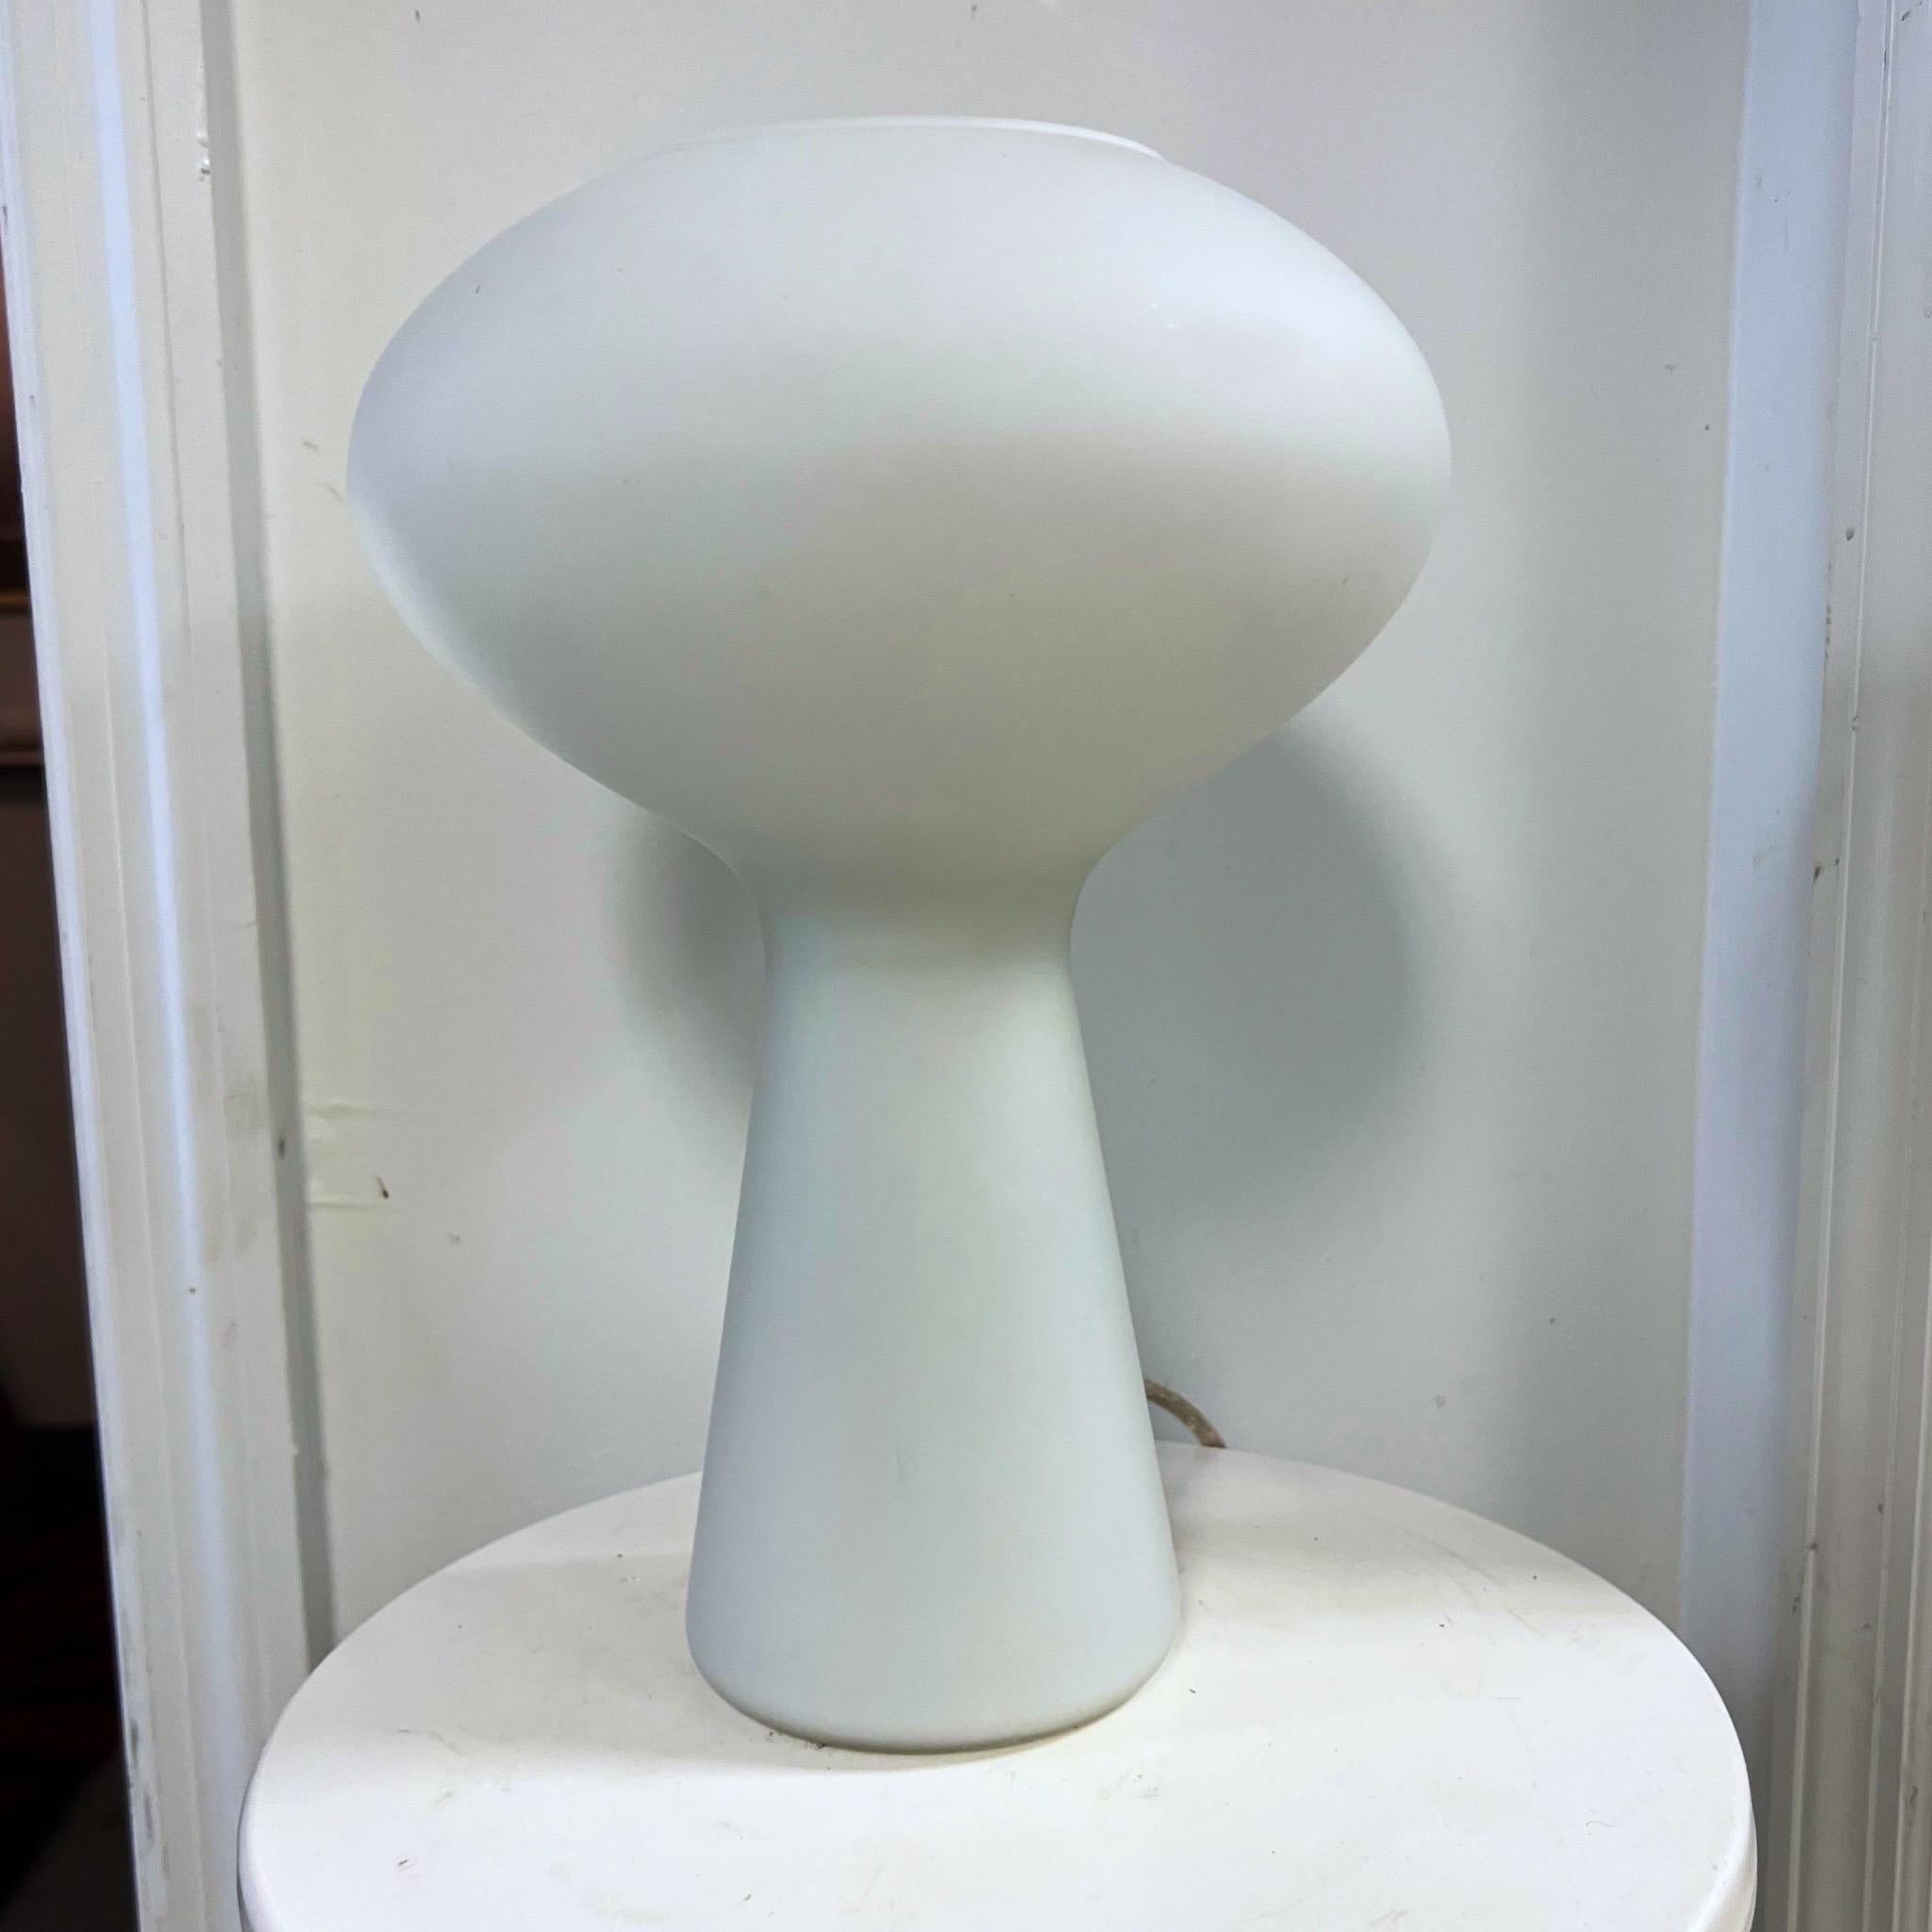 Organic modern table lamp, designed by Lisa Johansson-Pape. Handblown glass is shaped in a pleasing yet playful mushroom form. Lovely opaline quality to the glass. A stunning table lamp designed by Lisa Johansson-Pape of Finland in 1960. Beautiful